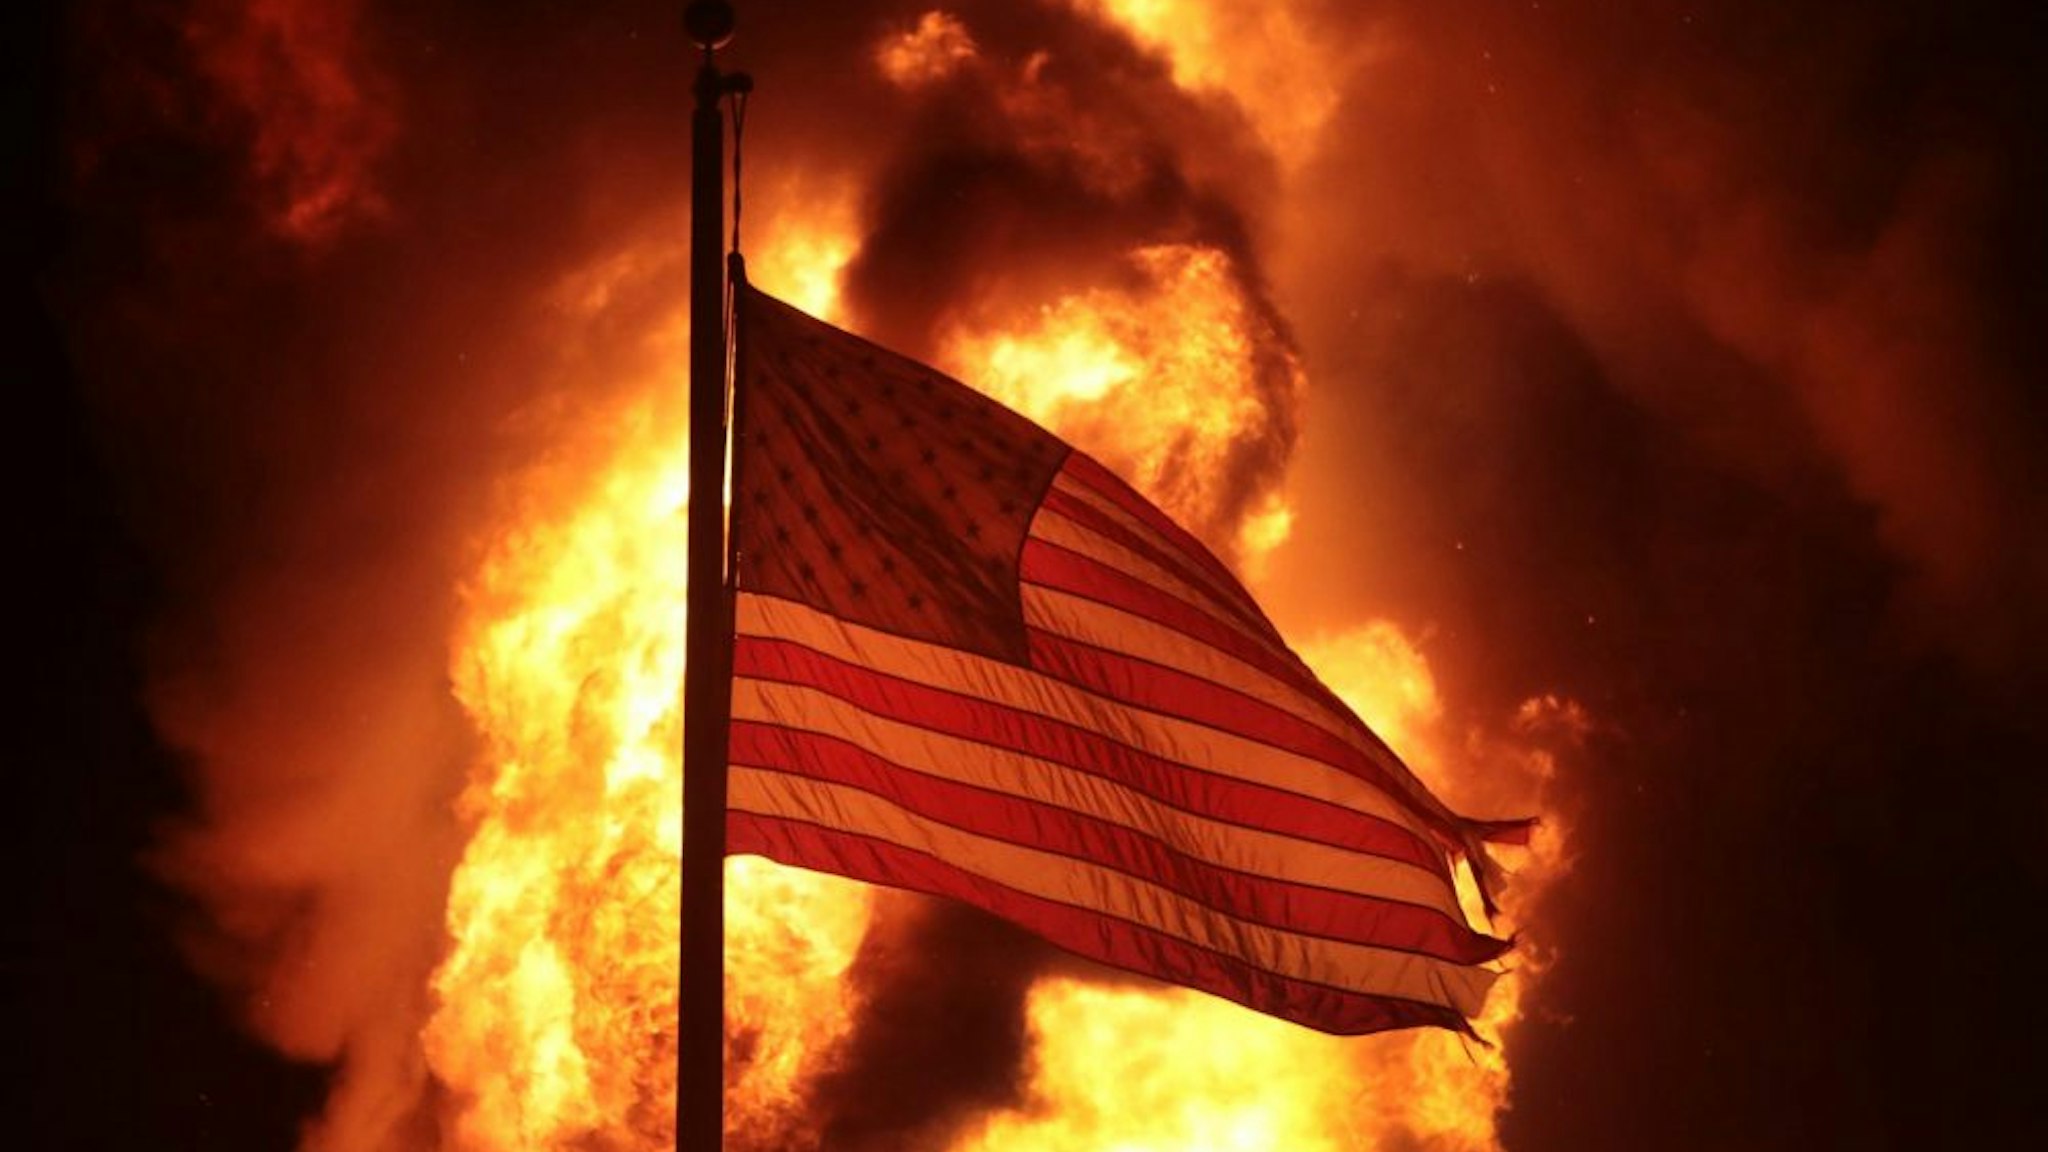 KENOSHA, WISCONSIN - AUGUST 24: A flag flies in front of a department of corrections building after it was set ablaze during a second night of rioting on August 24, 2020 in Kenosha, Wisconsin. Rioting as well as clashes between police and protesters began Sunday night after a police officer shot Jacob Blake 7 times in the back in front of his three children.